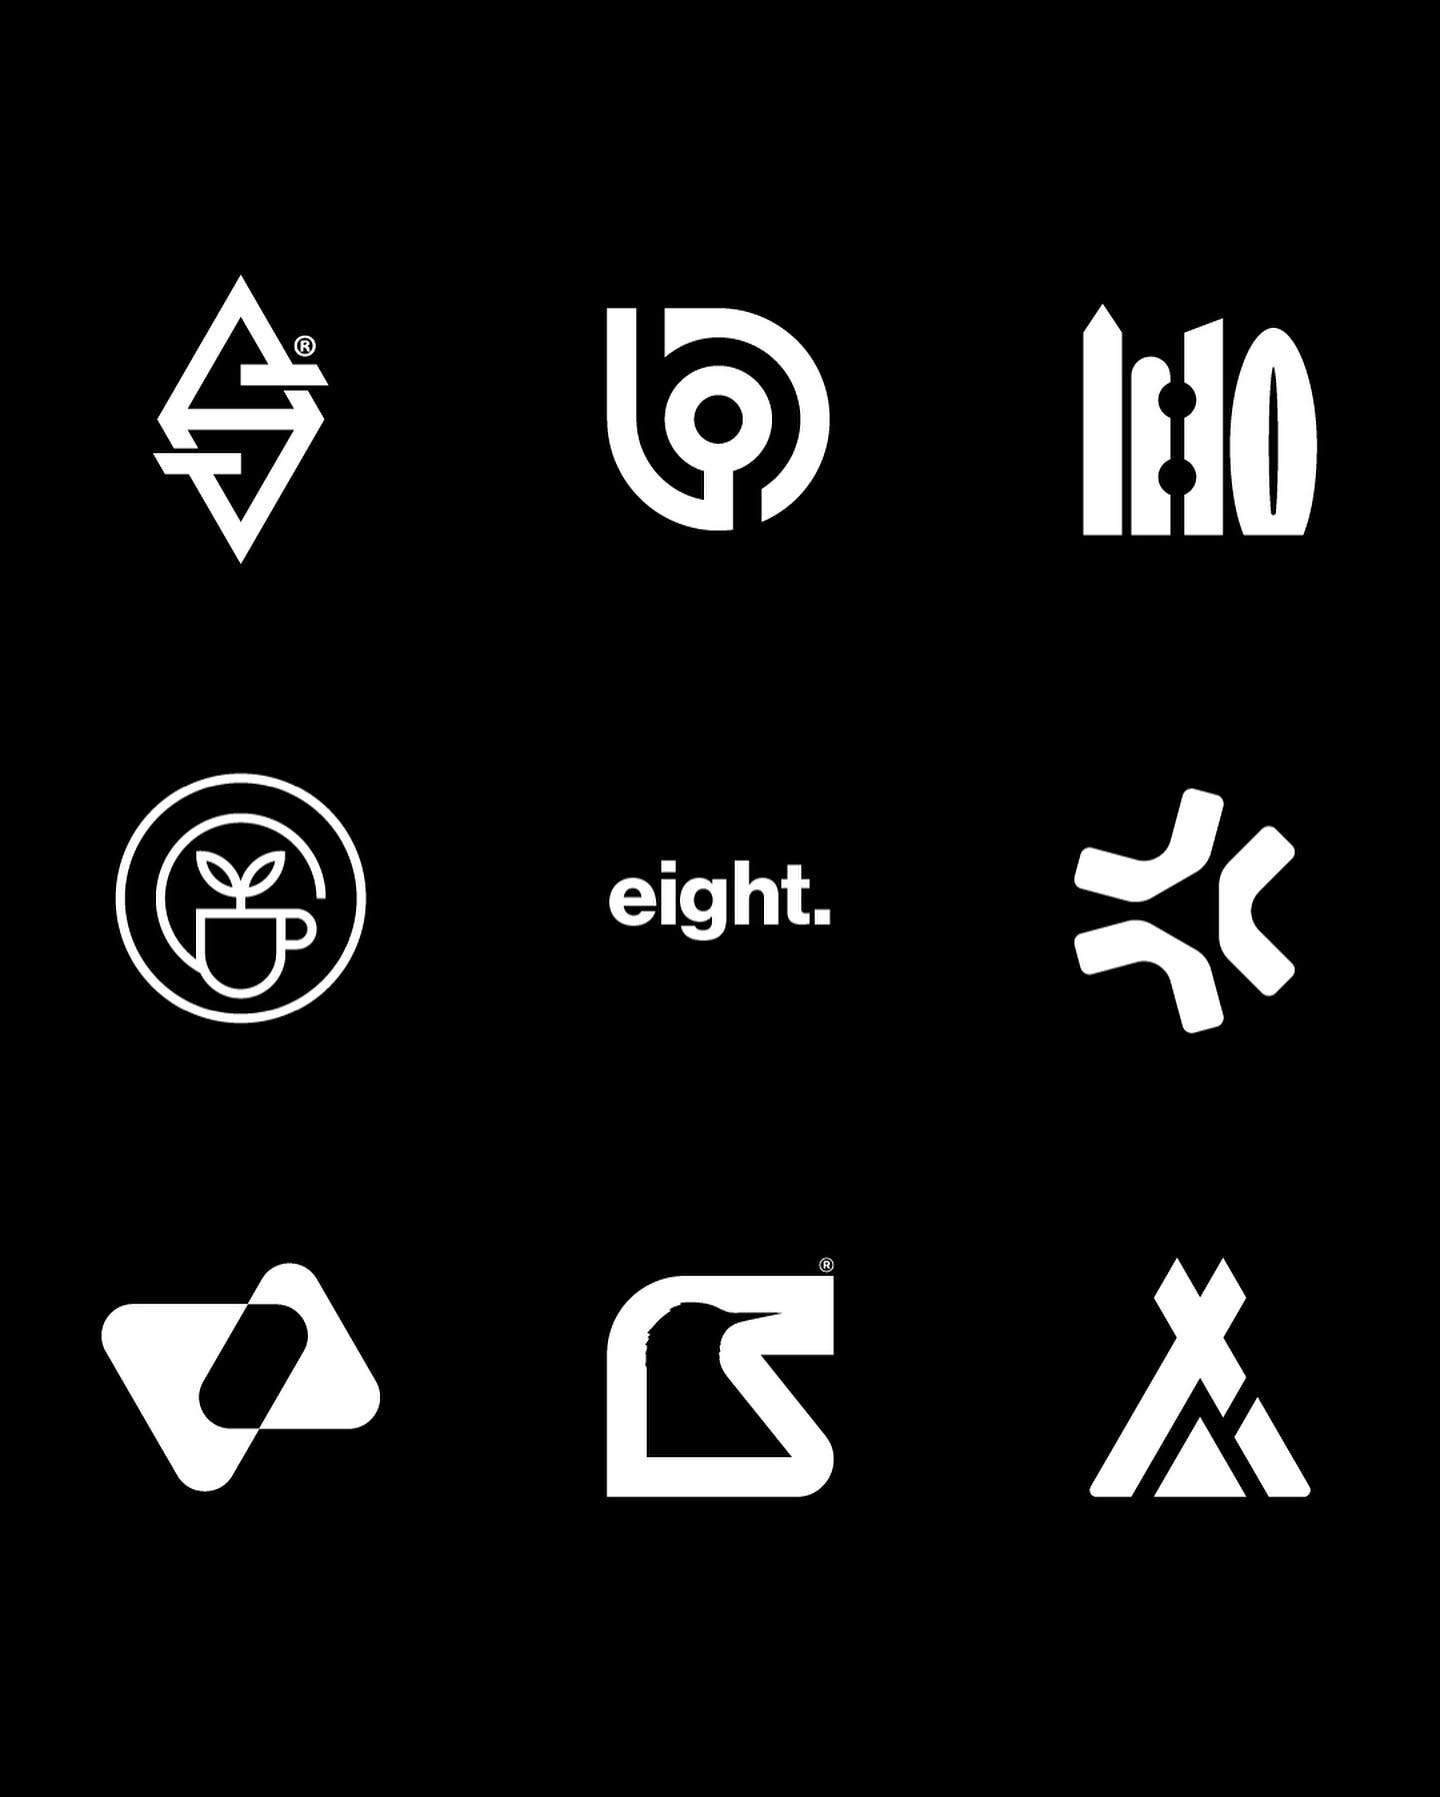 8 past logos for 8 years since I started @breathedotdesign 
In order:
@salitter_cycles 
#b1churches 
@eleven10architecture 
#cafeconnect for @wellspringscommunitychurch 
@nextdoorhextable 
#viewcast for @7streammedia 
@starlingcycles 
@somersetcamps 